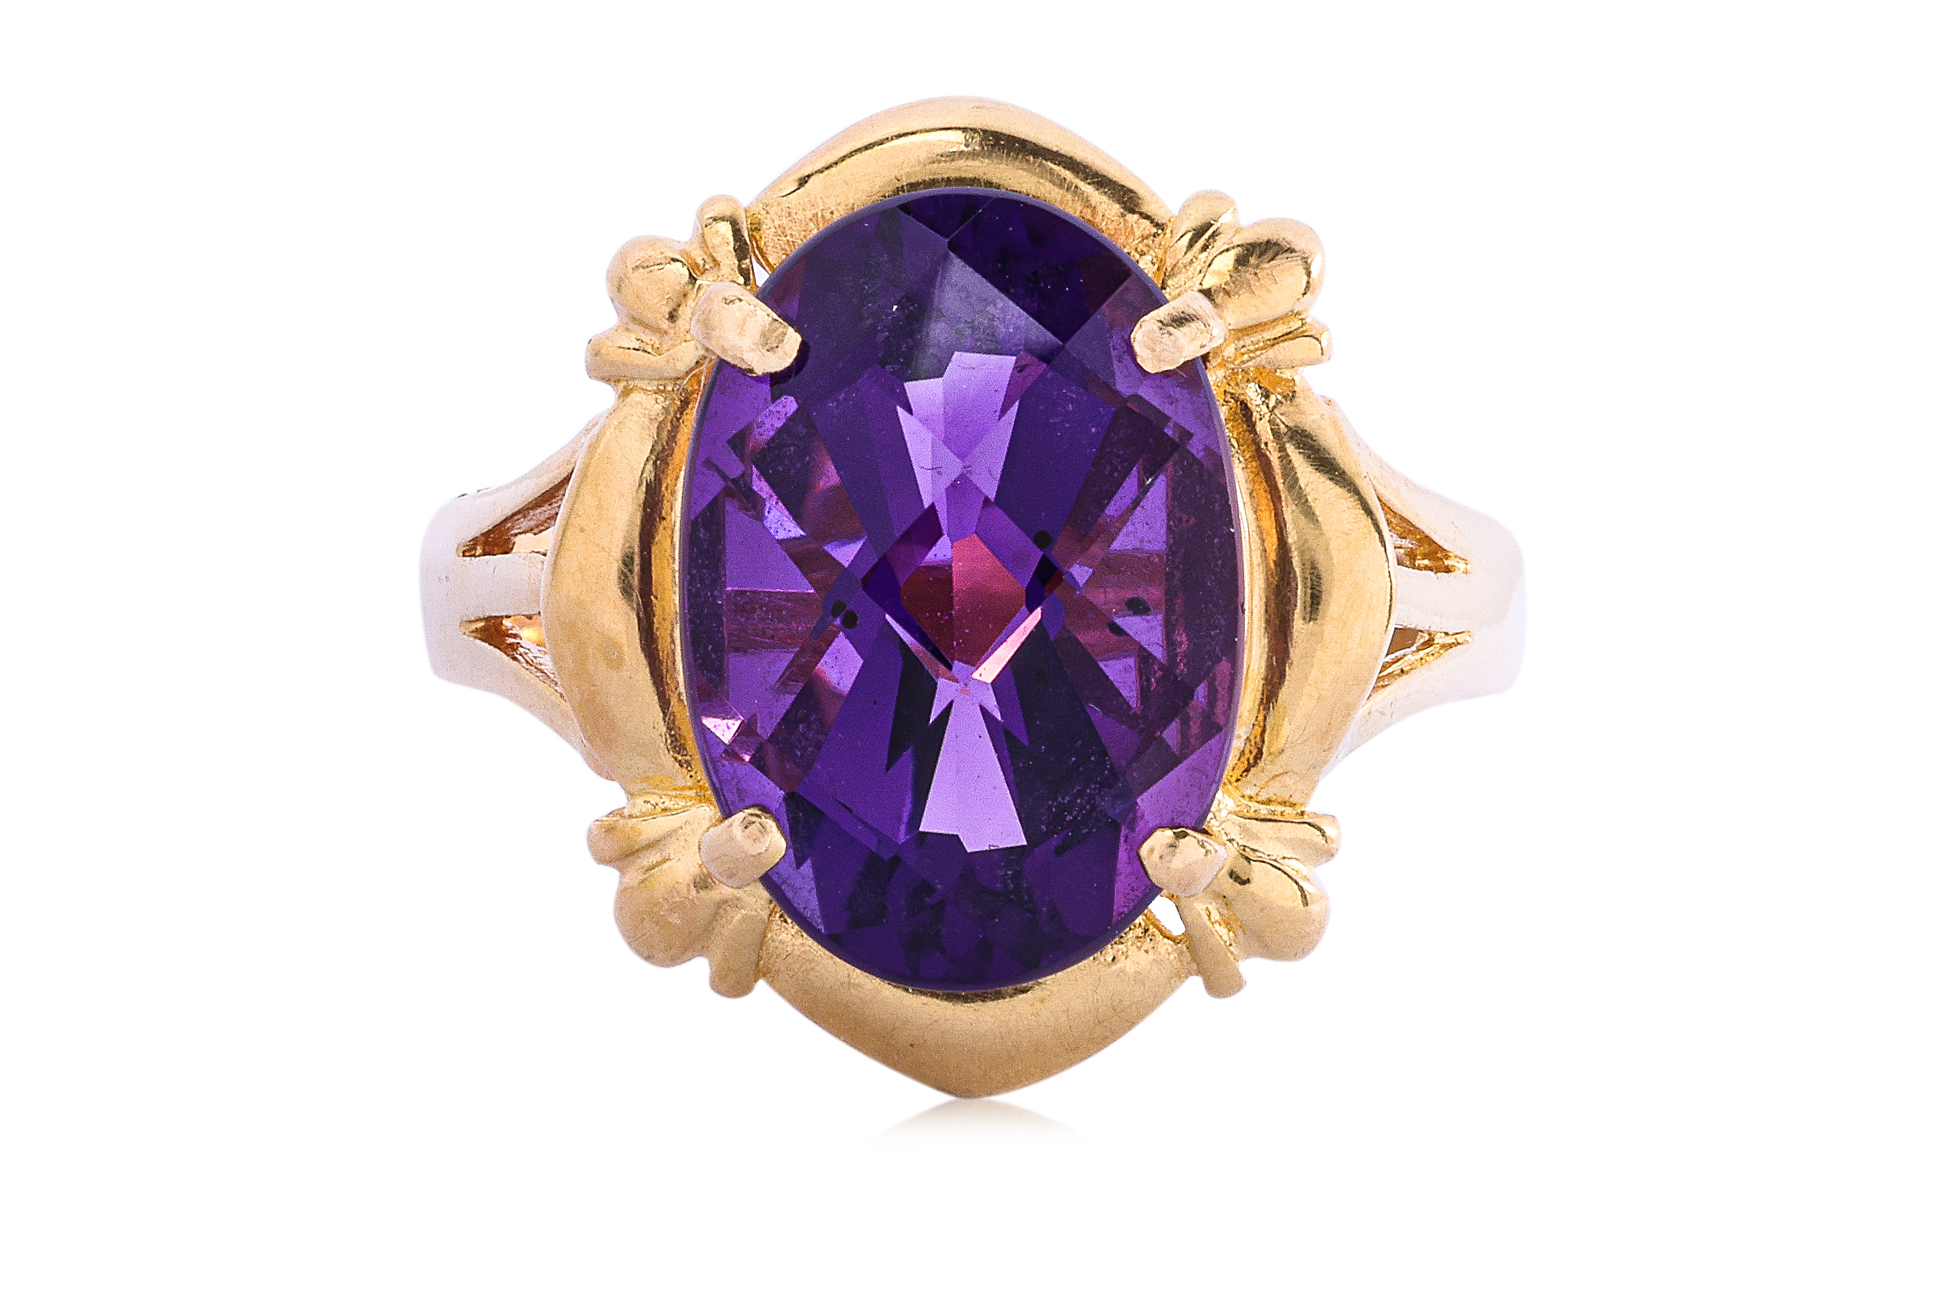 A PAIR OF AMETHYST CLIP EARRINGS AND AN AMETHYST RING - Image 5 of 5